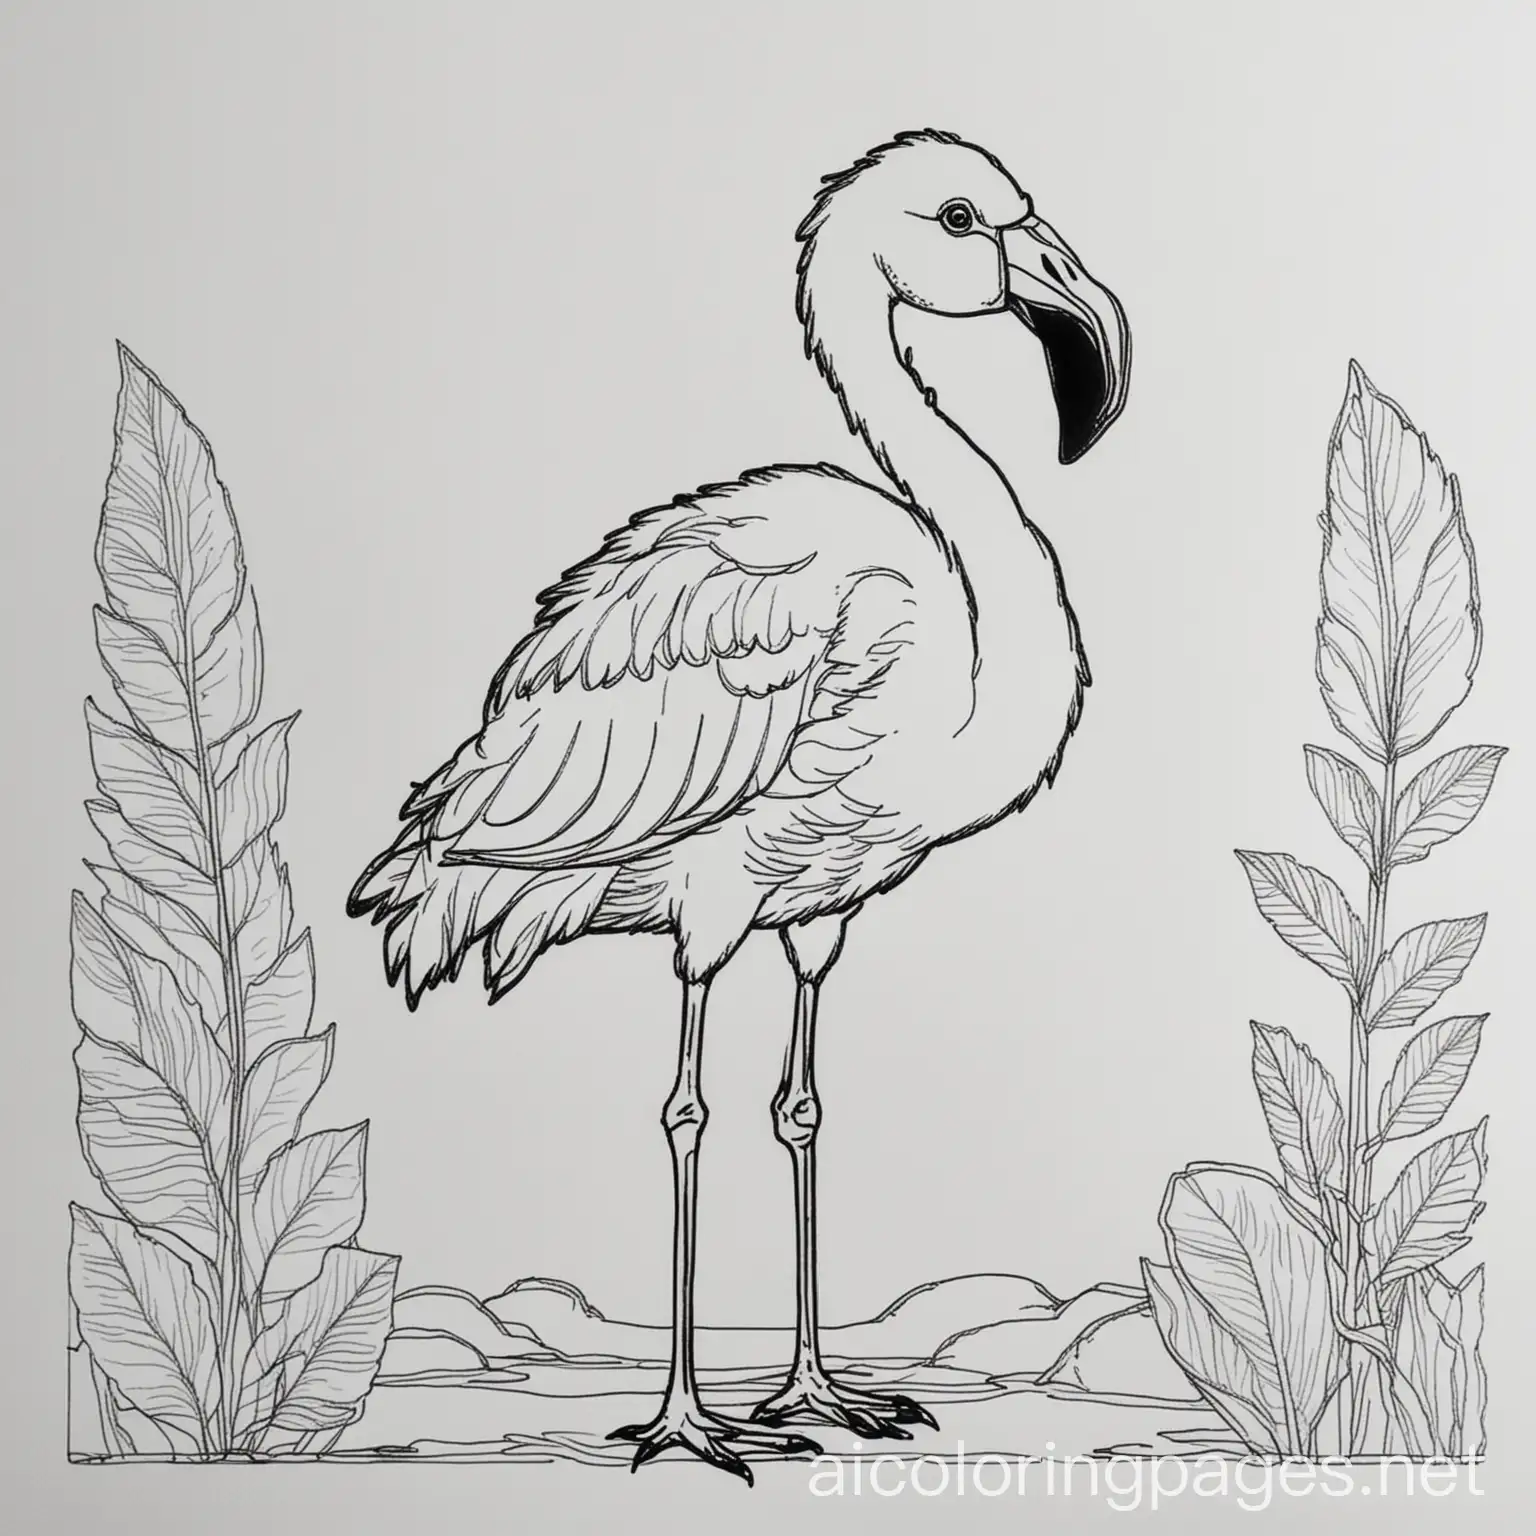 Flamant rose , Coloring Page, black and white, line art, white background, Simplicity, Ample White Space. The background of the coloring page is plain white to make it easy for young children to color within the lines. The outlines of all the subjects are easy to distinguish, making it simple for kids to color without too much difficulty, Coloring Page, black and white, line art, white background, Simplicity, Ample White Space. The background of the coloring page is plain white to make it easy for young children to color within the lines. The outlines of all the subjects are easy to distinguish, making it simple for kids to color without too much difficulty